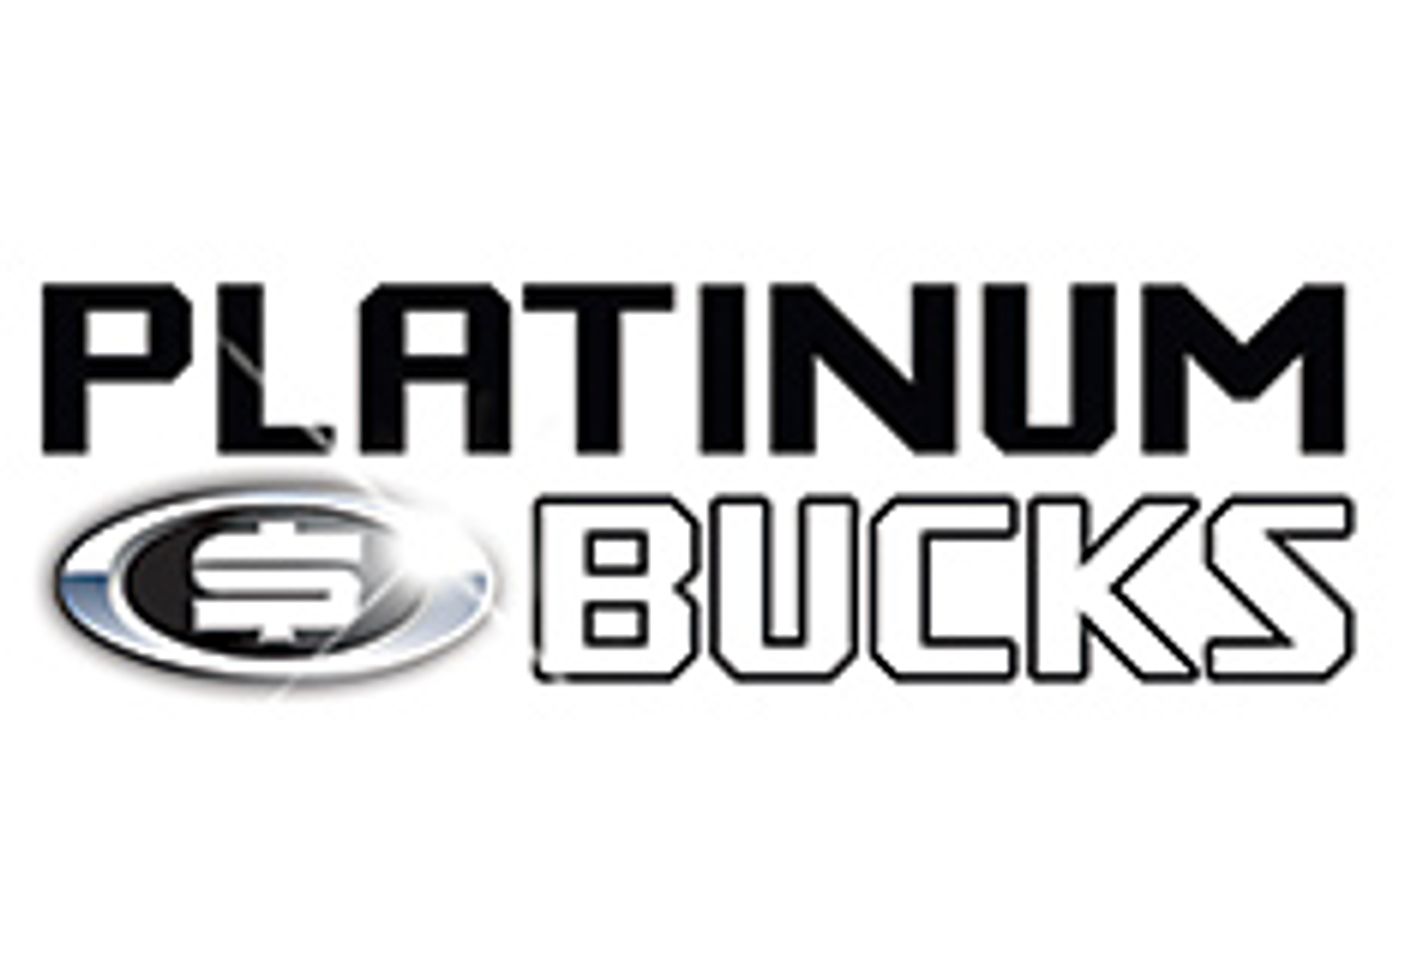 Platinum Bucks Offers $40 PPS on Free Joins